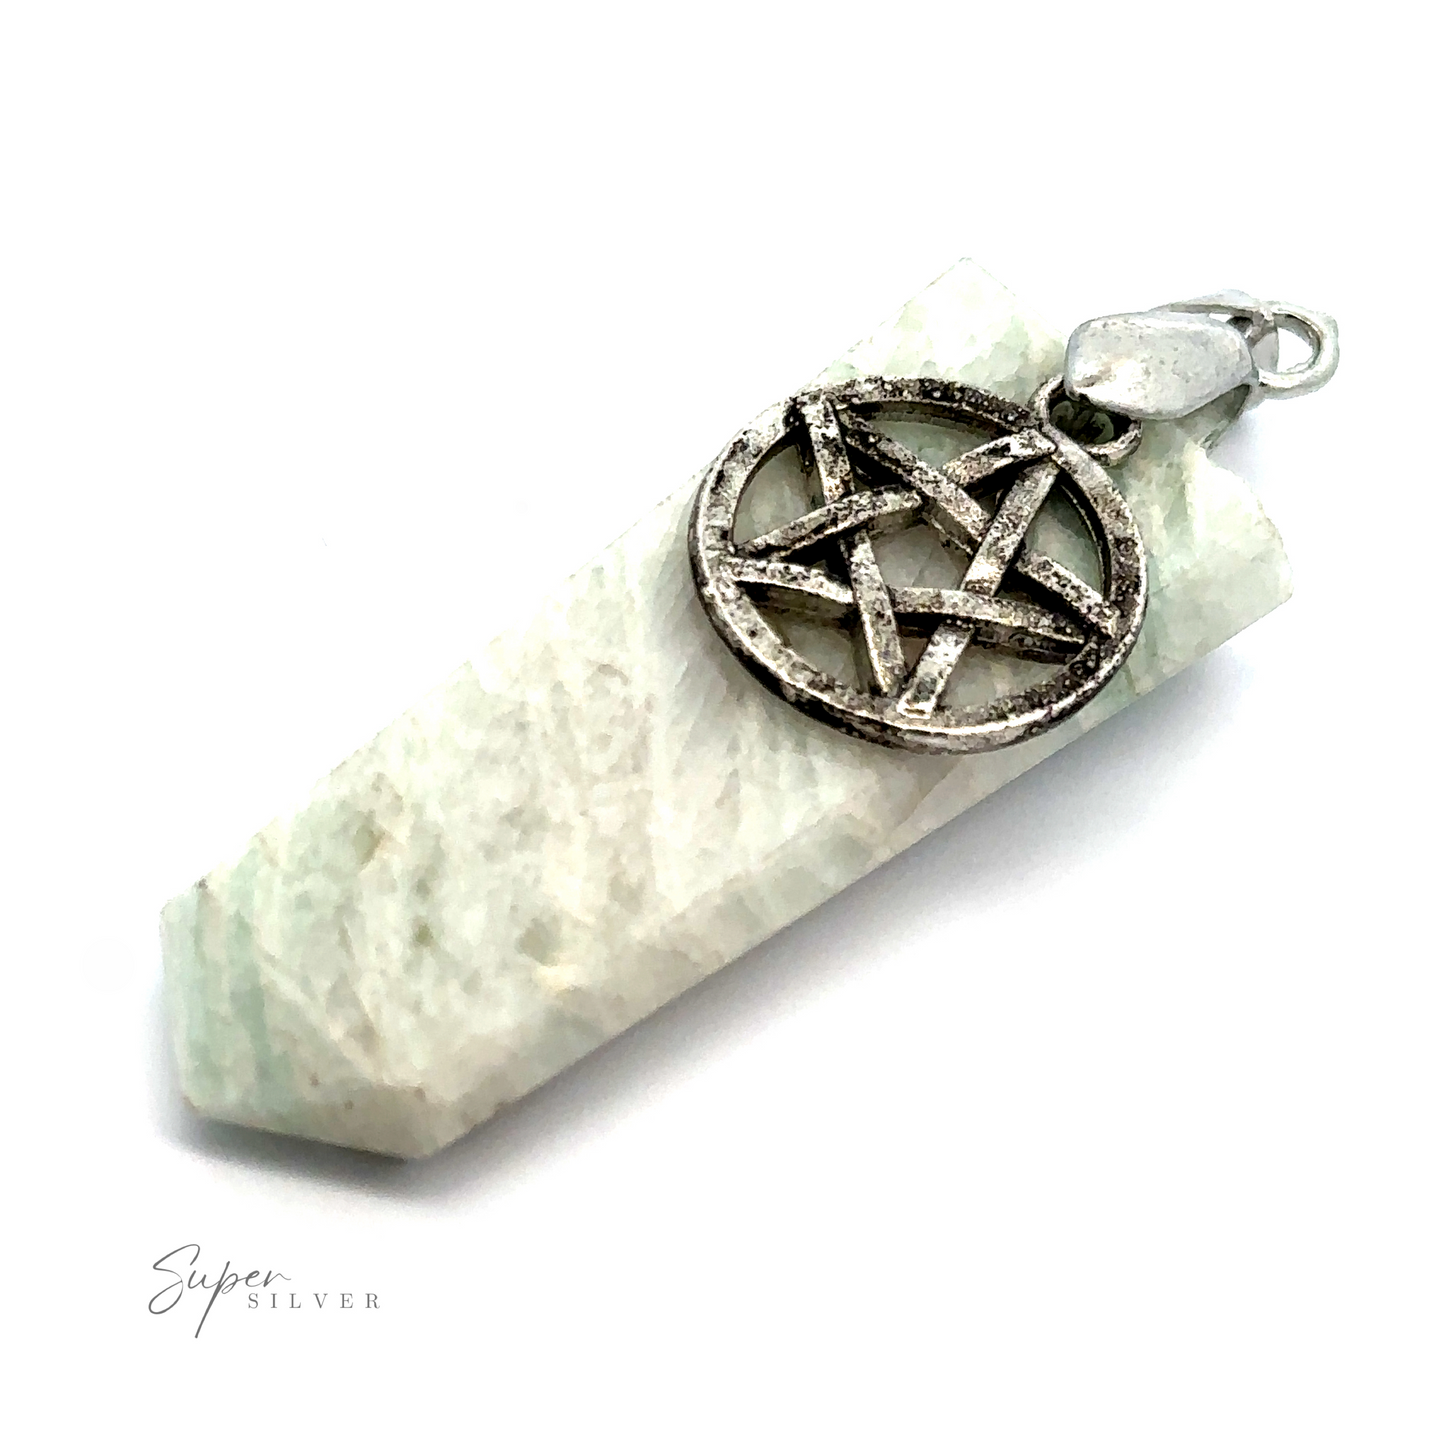 
                  
                    A Pentagram Stone Slab Pendant is attached to a white crystal shard. The "Super Silver" logo is visible in the bottom left corner.
                  
                